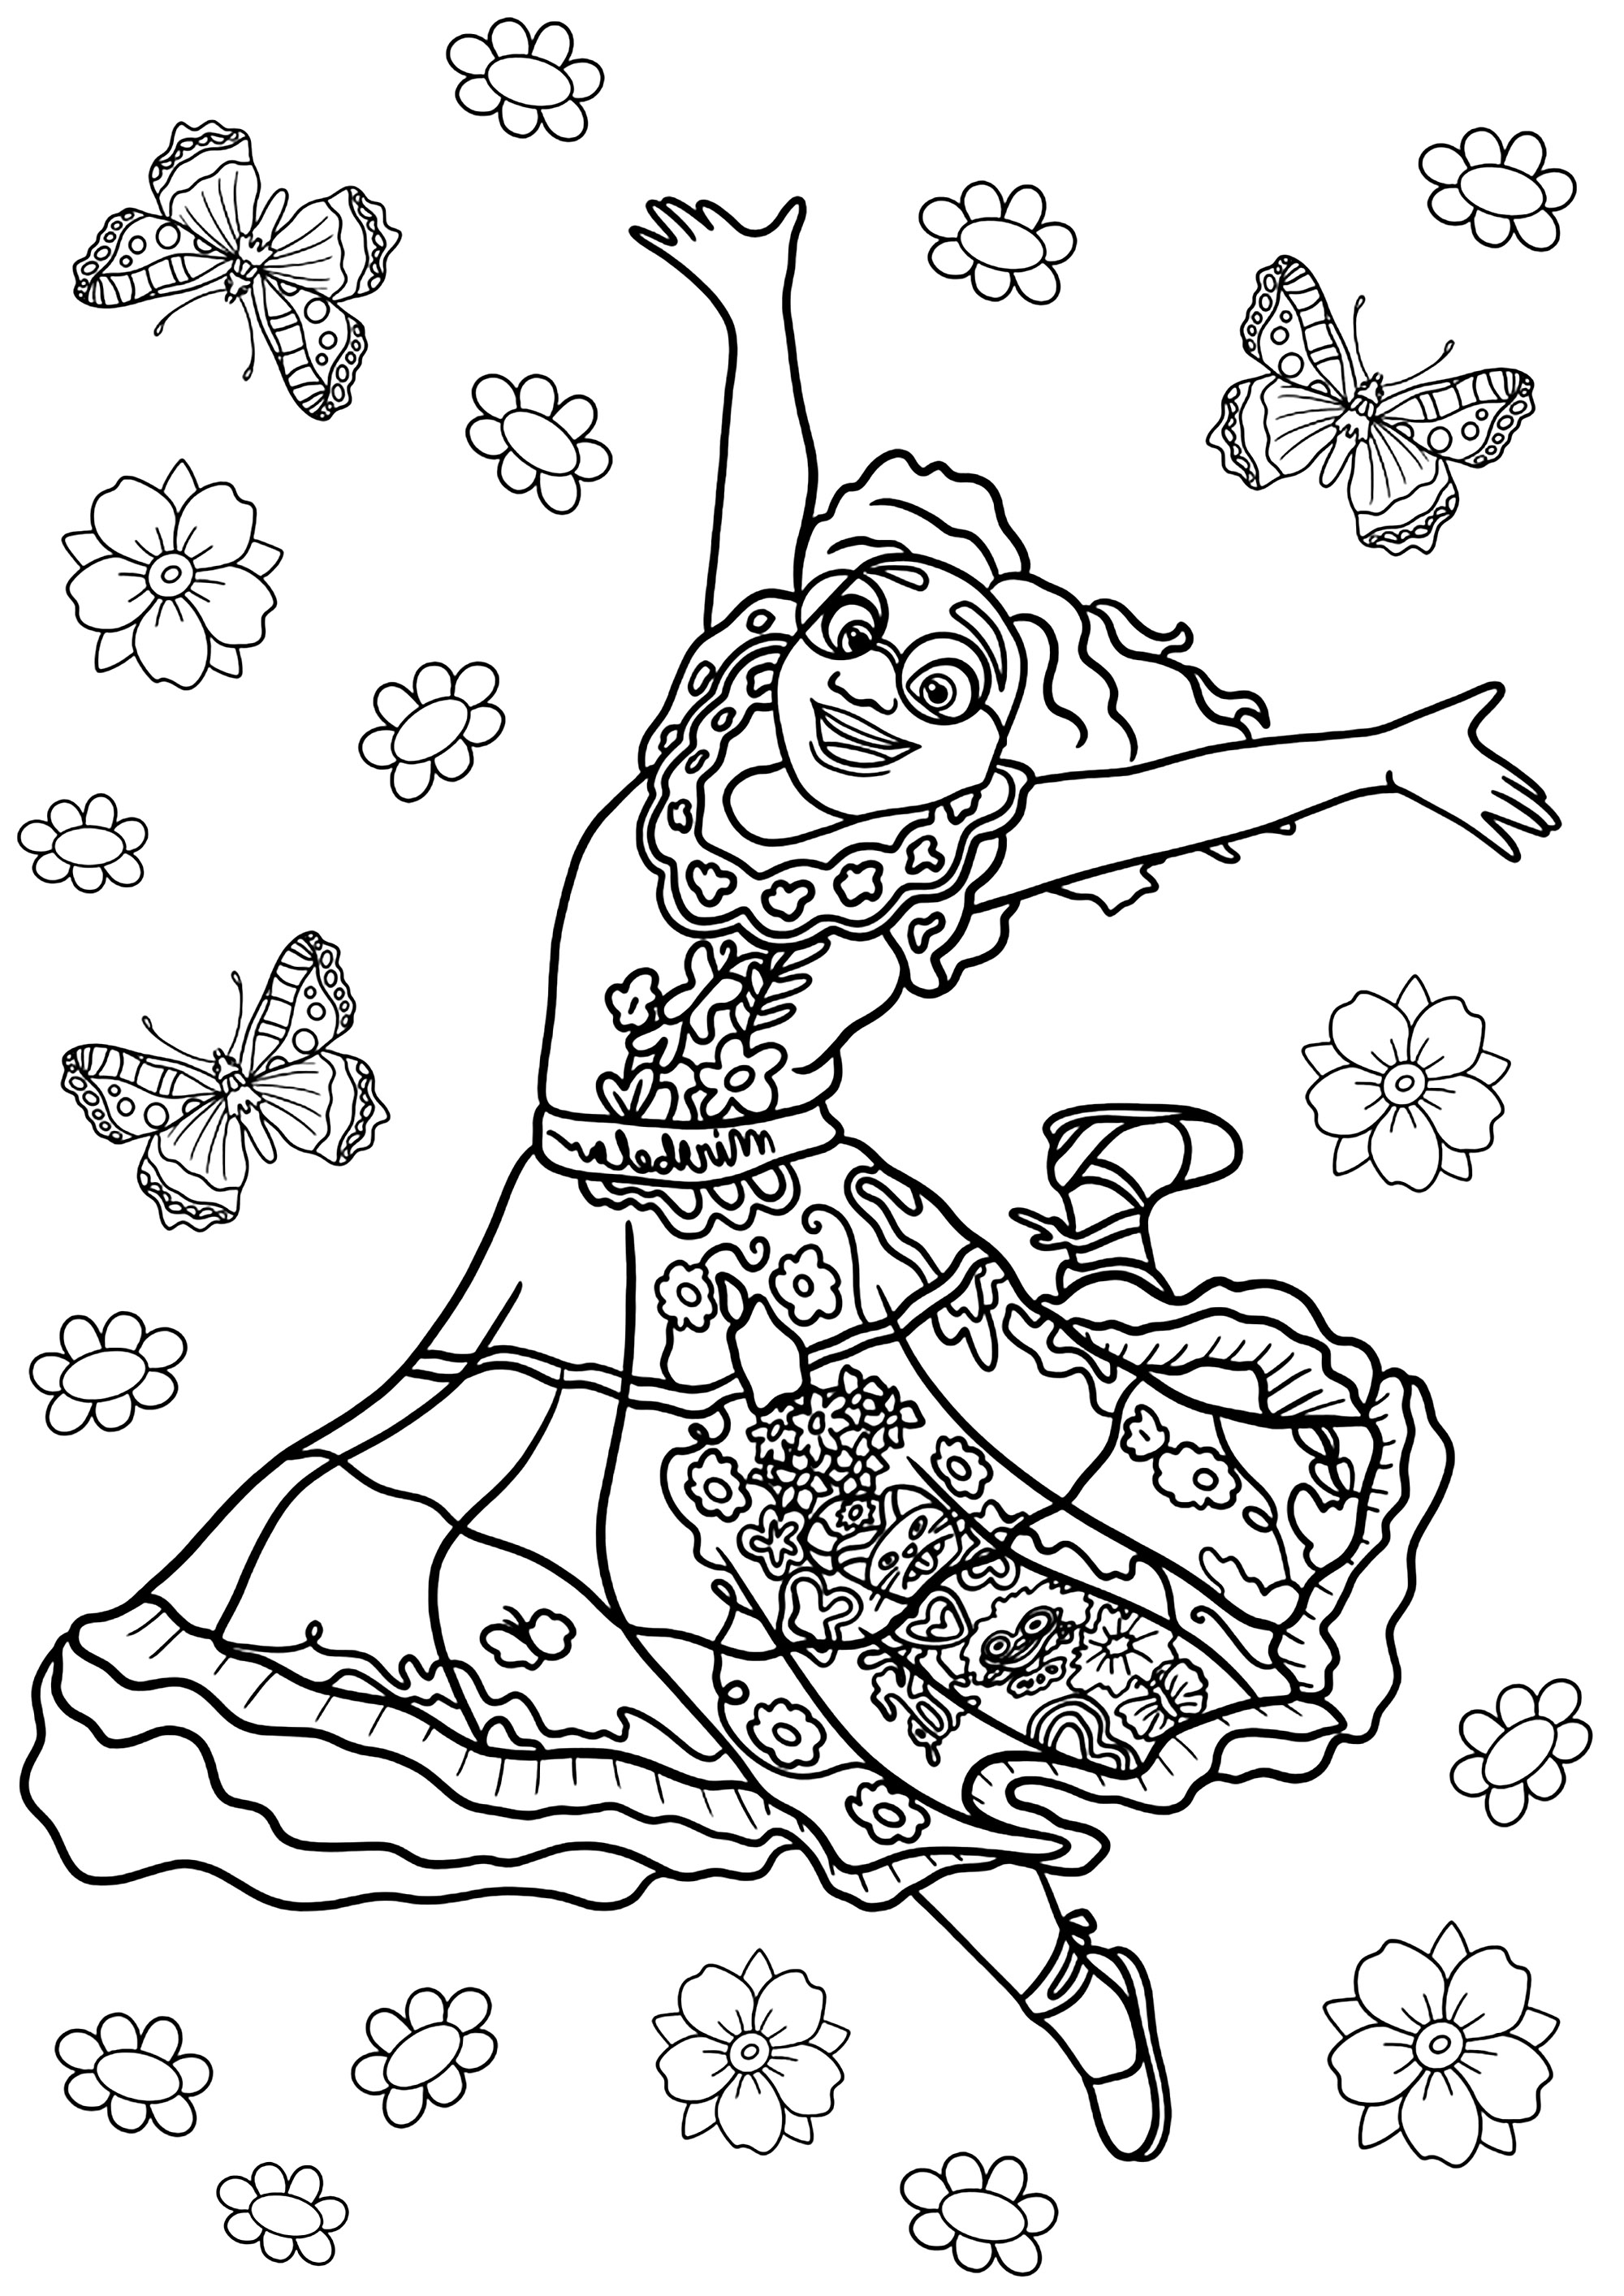 Encanto coloring page: Mirabel jumping among flowers and butterflies